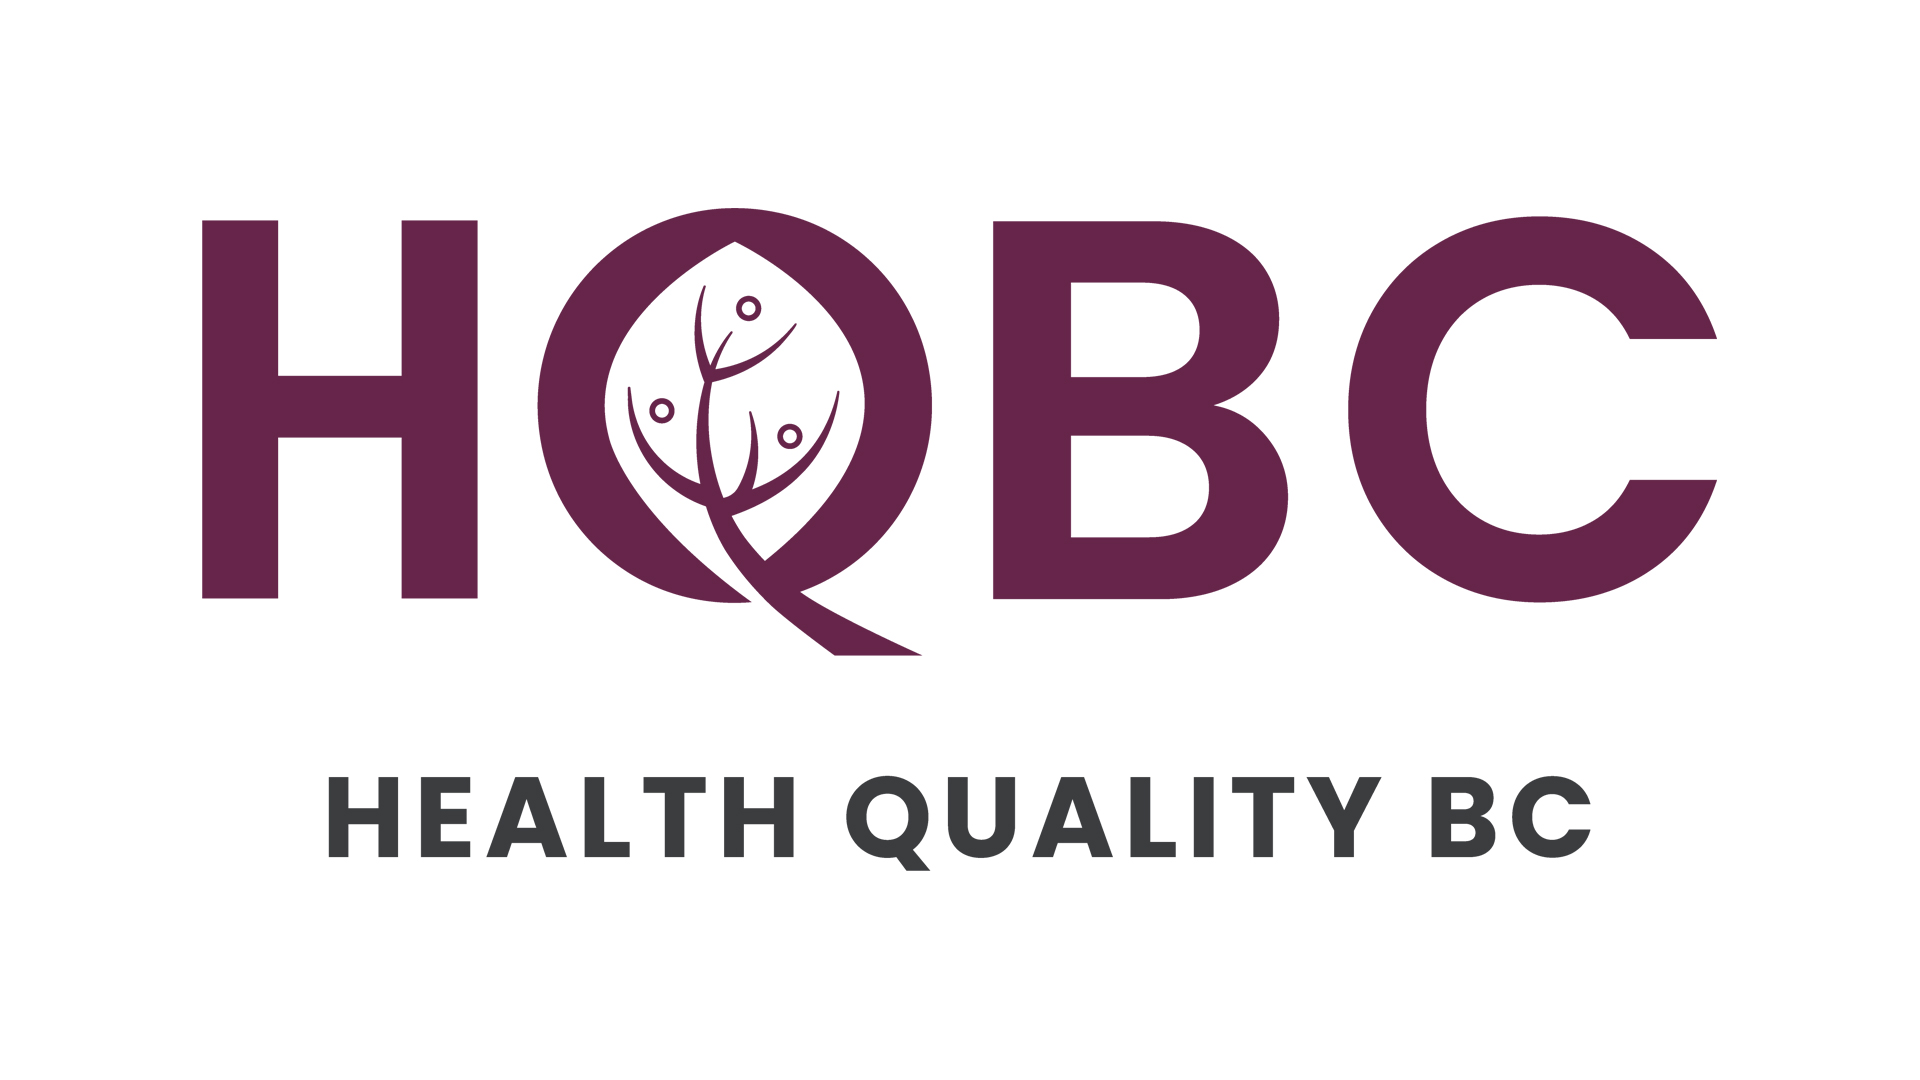 Health-Quality-BC-Why-Change-Our-Name-Featured-Image